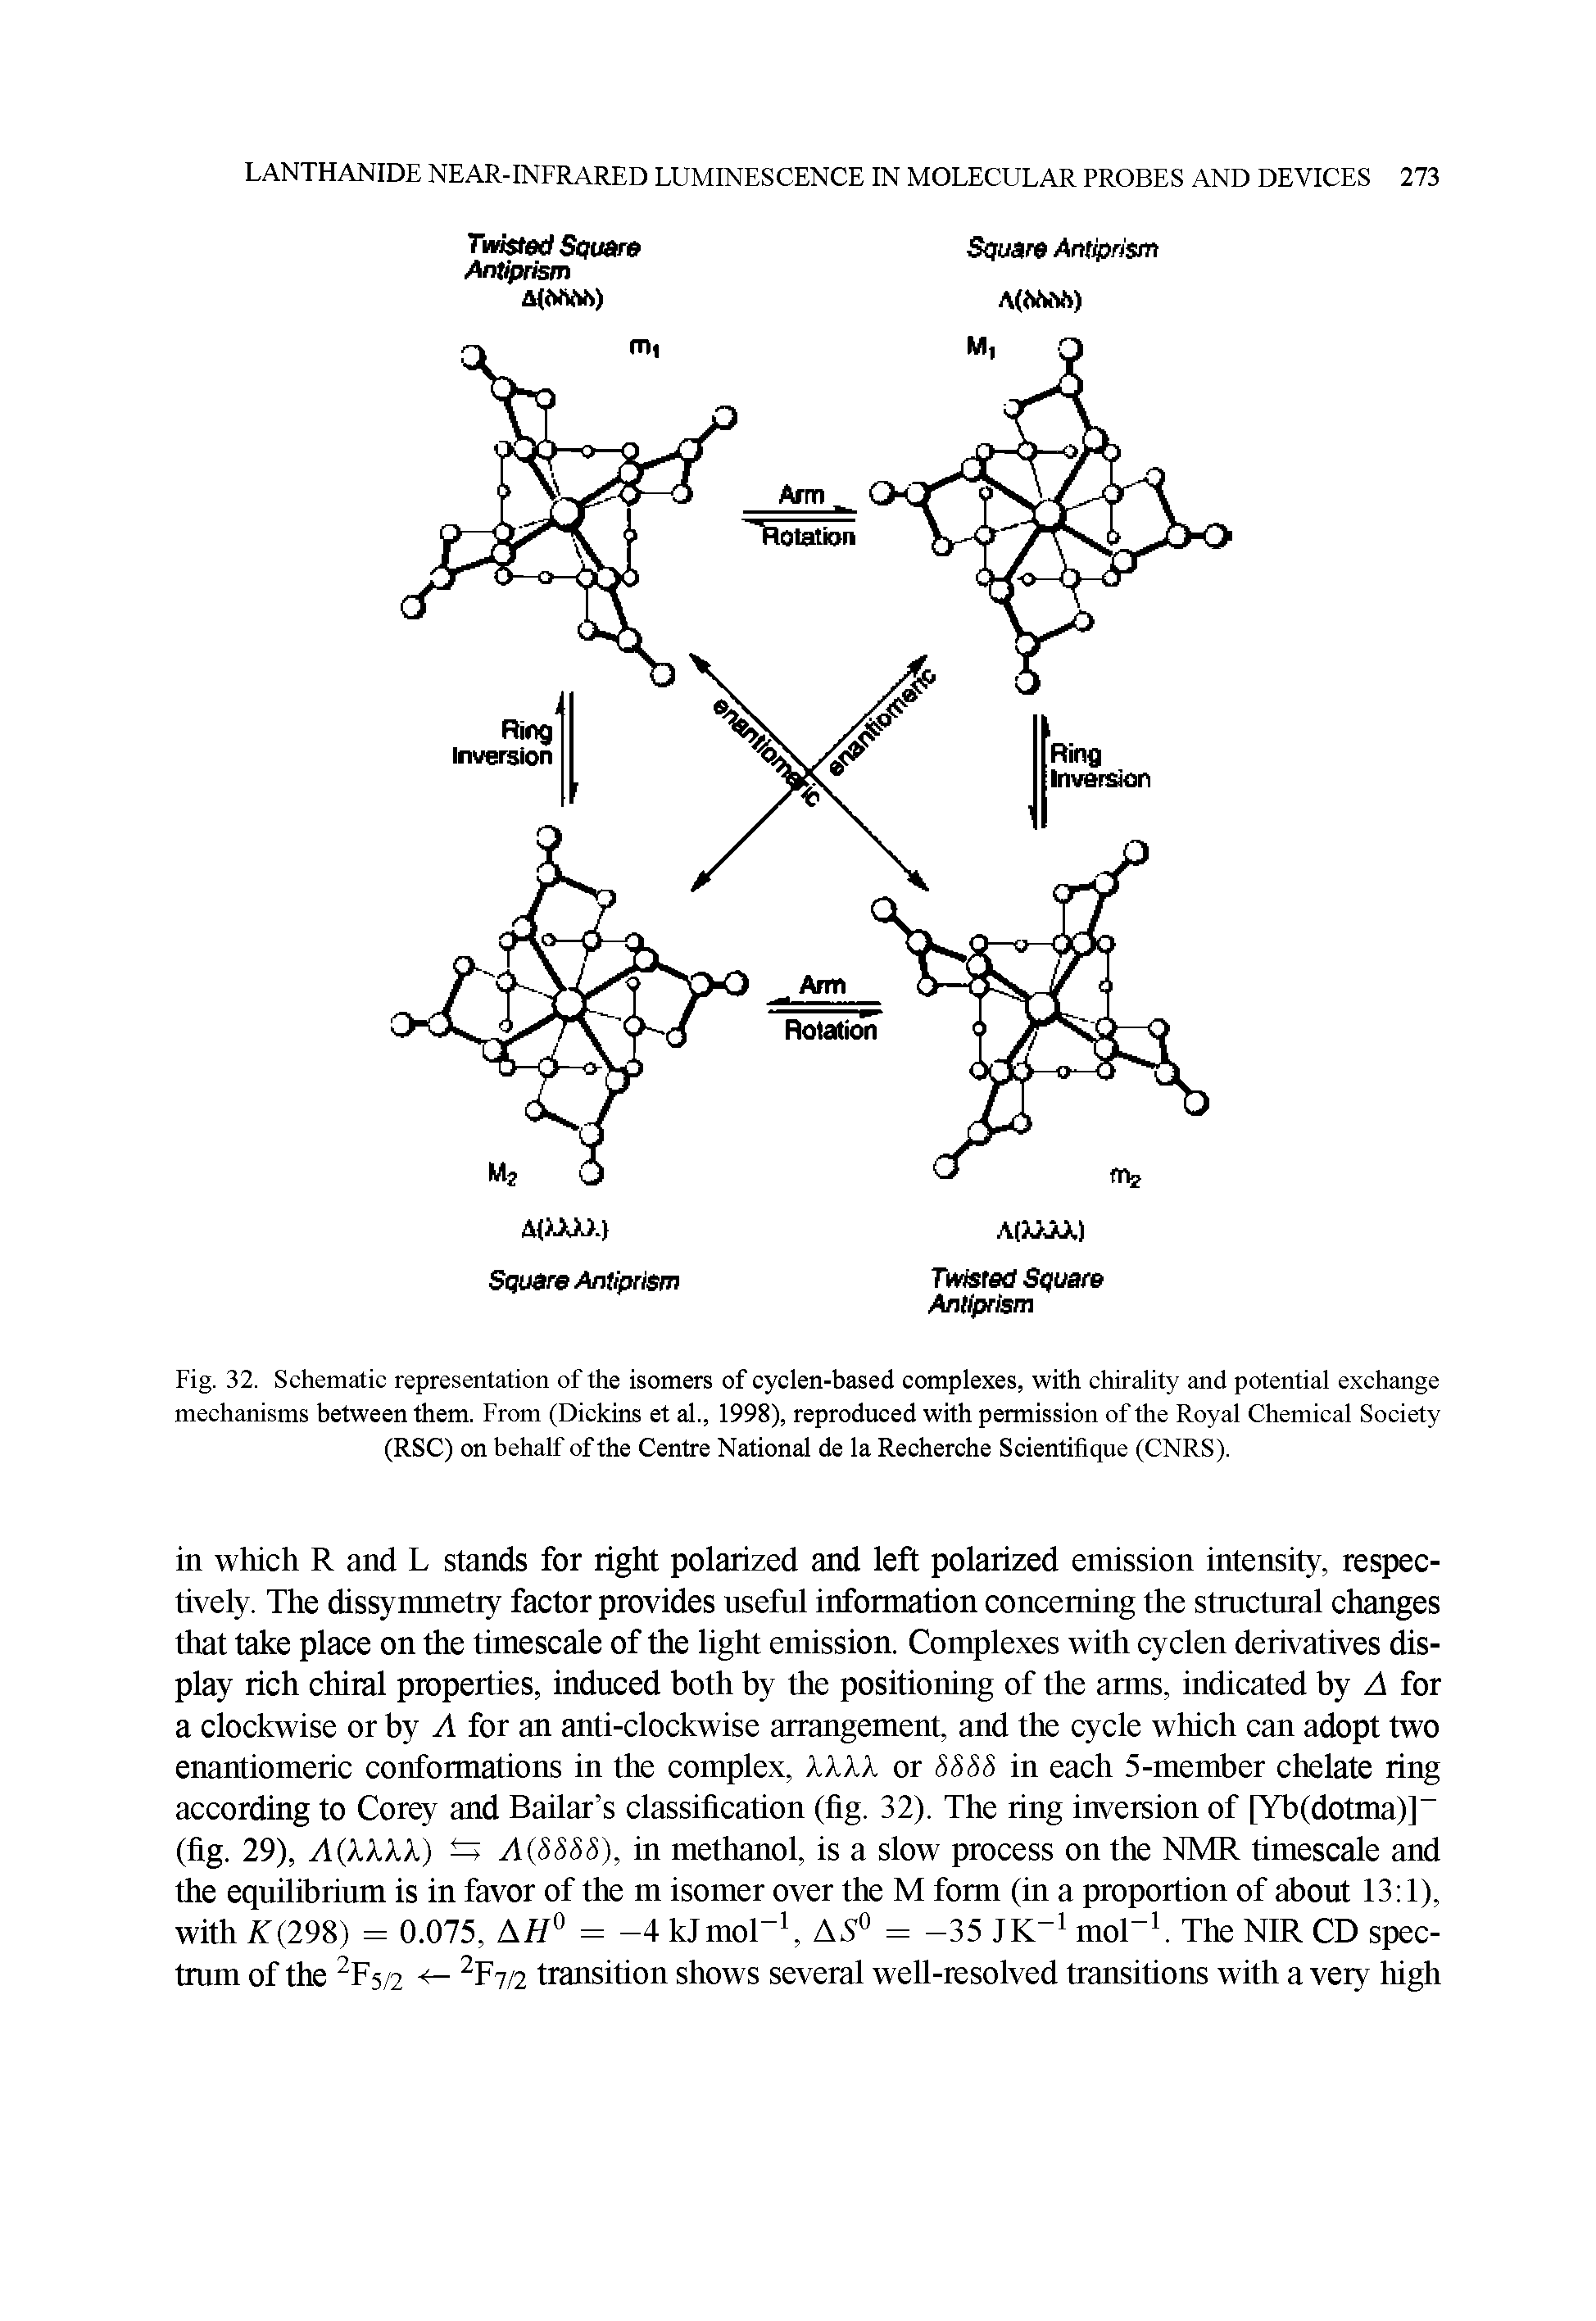 Fig. 32. Schematic representation of the isomers of cyclen-based complexes, with chirality and potential exchange mechanisms between them. From (Dickins et al., 1998), reproduced with permission of the Royal Chemical Society (RSC) on behalf of the Centre National de la Recherche Scientifique (CNRS).